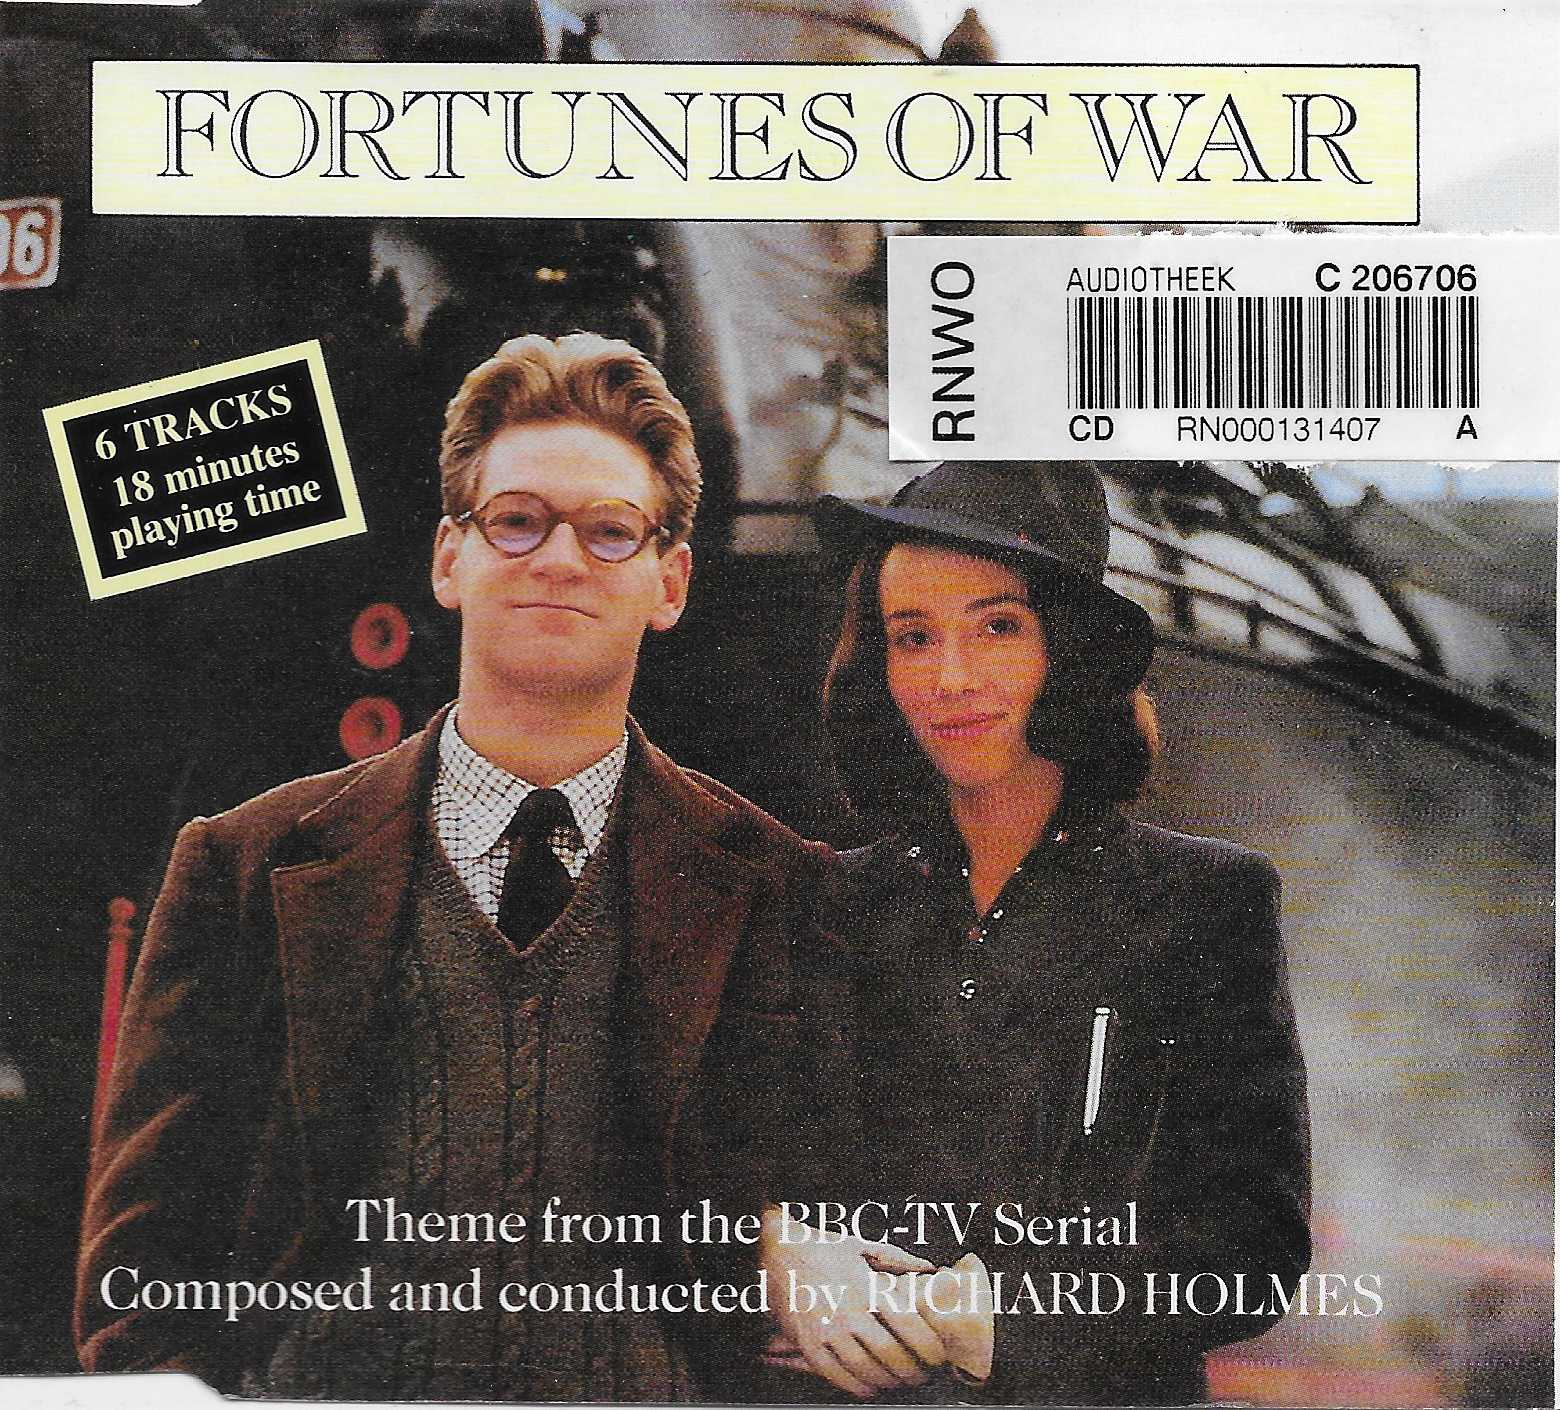 Picture of CD RSL 221 Fortunes of war by artist Richard Holmes from the BBC records and Tapes library